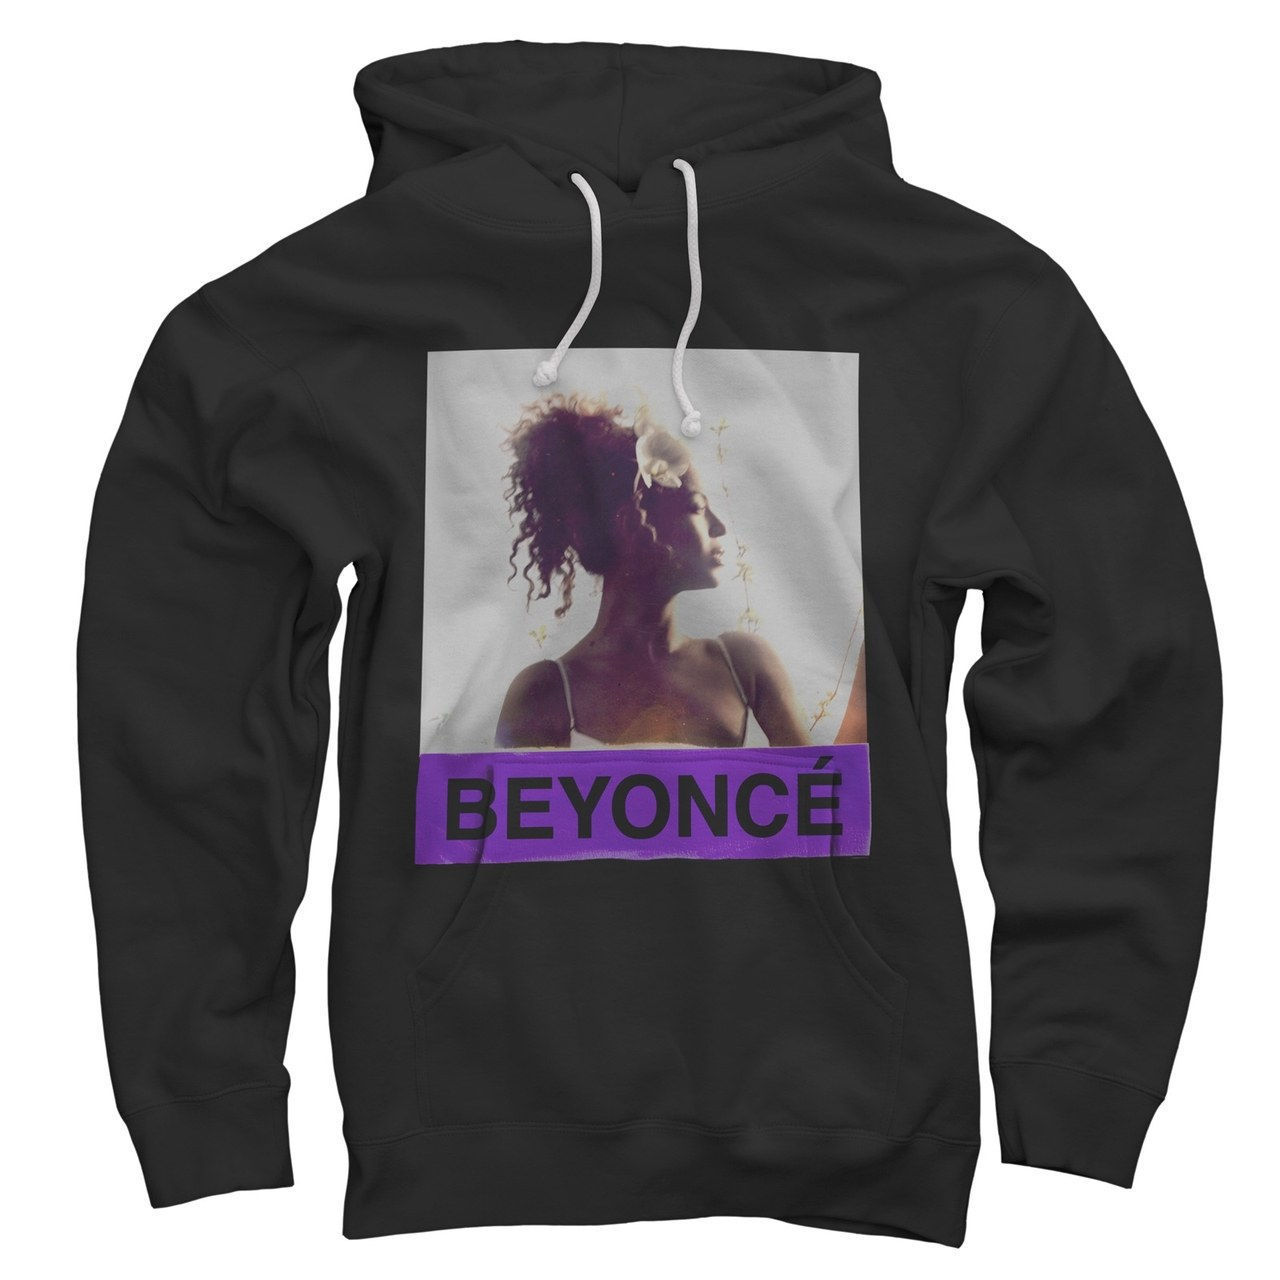 Farbe Photo Image Pullover, $60, [Beyonce.com](https://shop.beyonce.com/products/62183-color-photo-image-pullover)